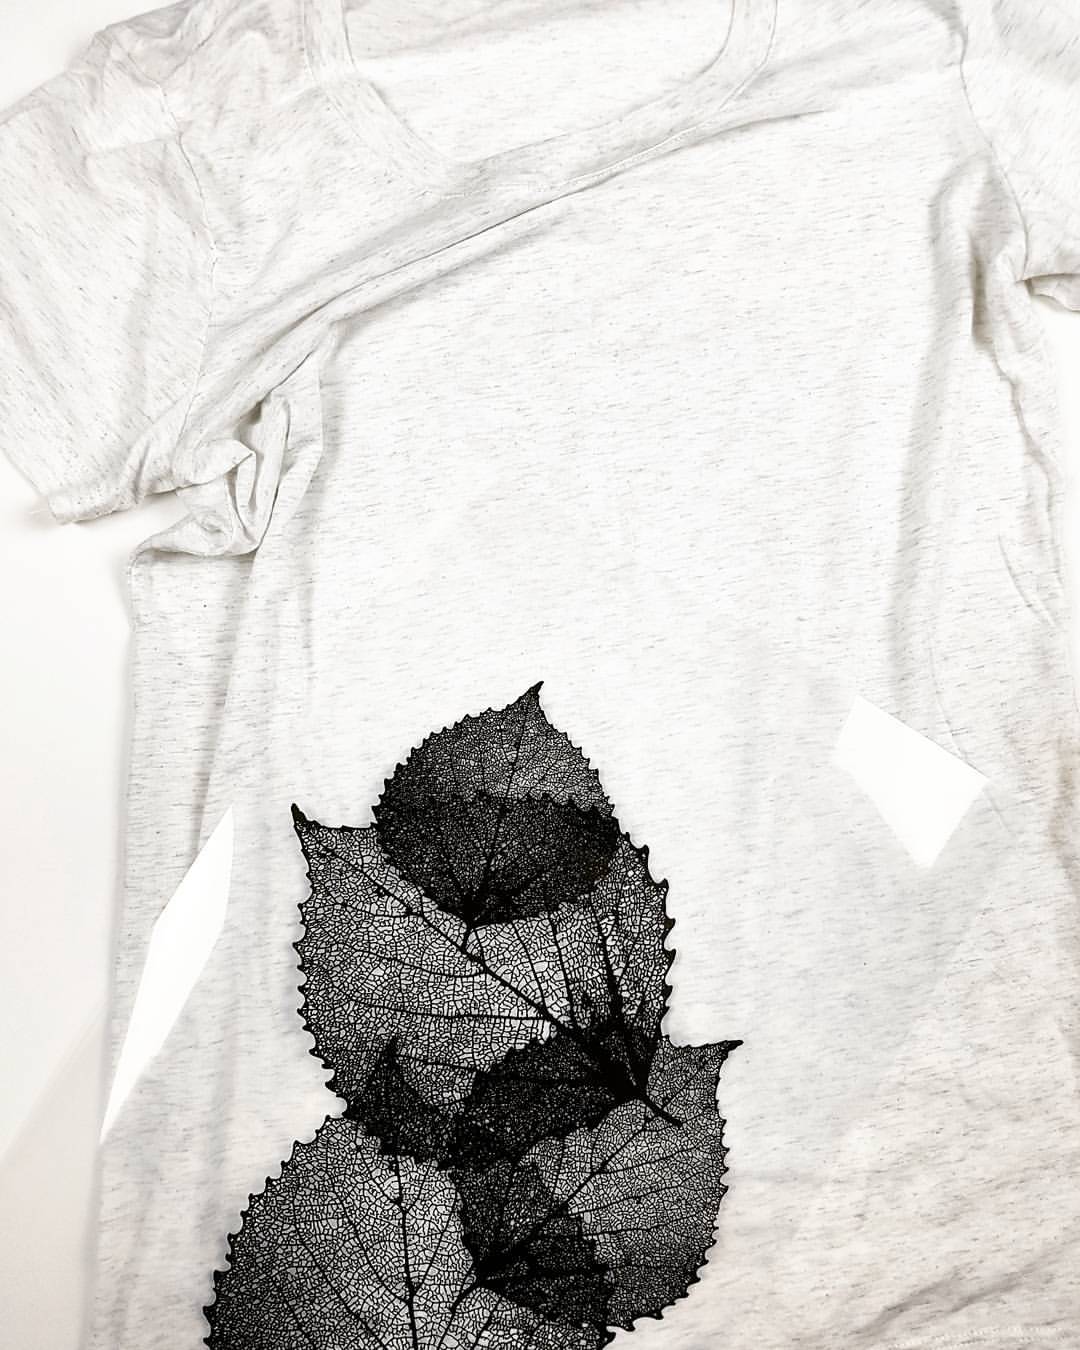 Women's shirt with transparency of leaves against it 